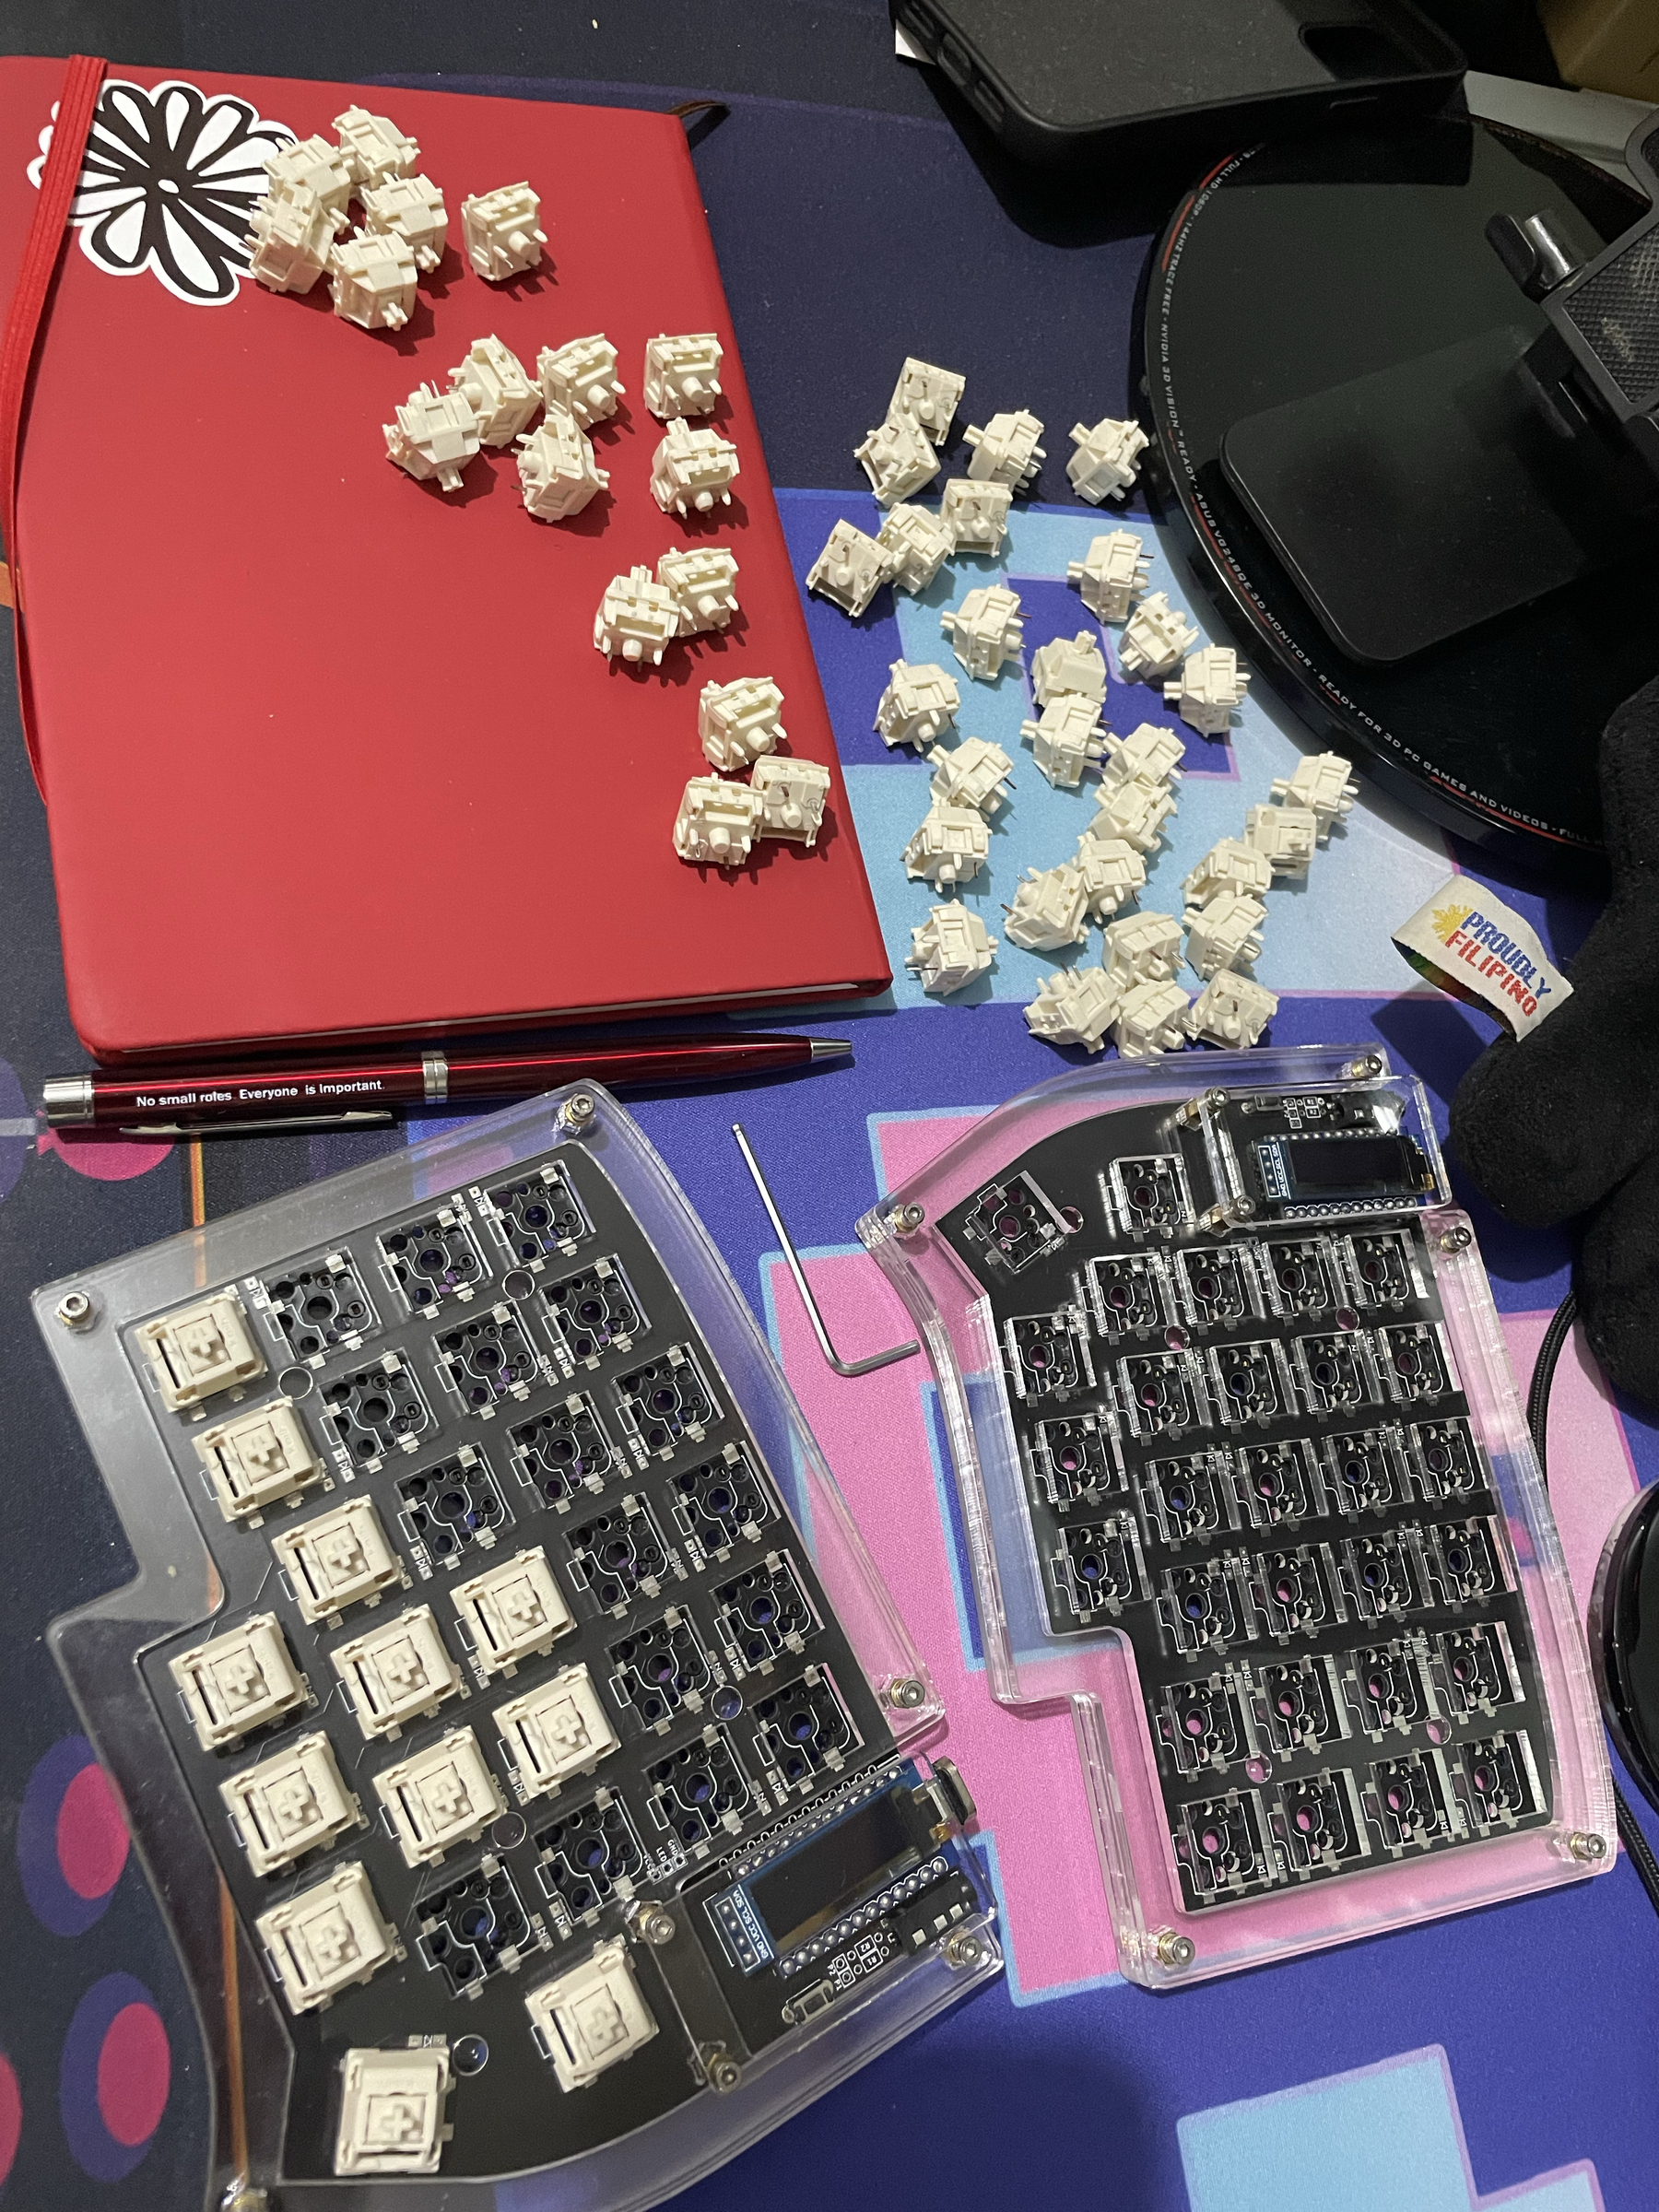 photo of Chi’s desk with a bunch of keyboard switches scattered on top of notebook, and some keyboard switches also inserted already in the split keyboard frame. The printed circuit board can be seen through the split keyboard’s acrylic case.